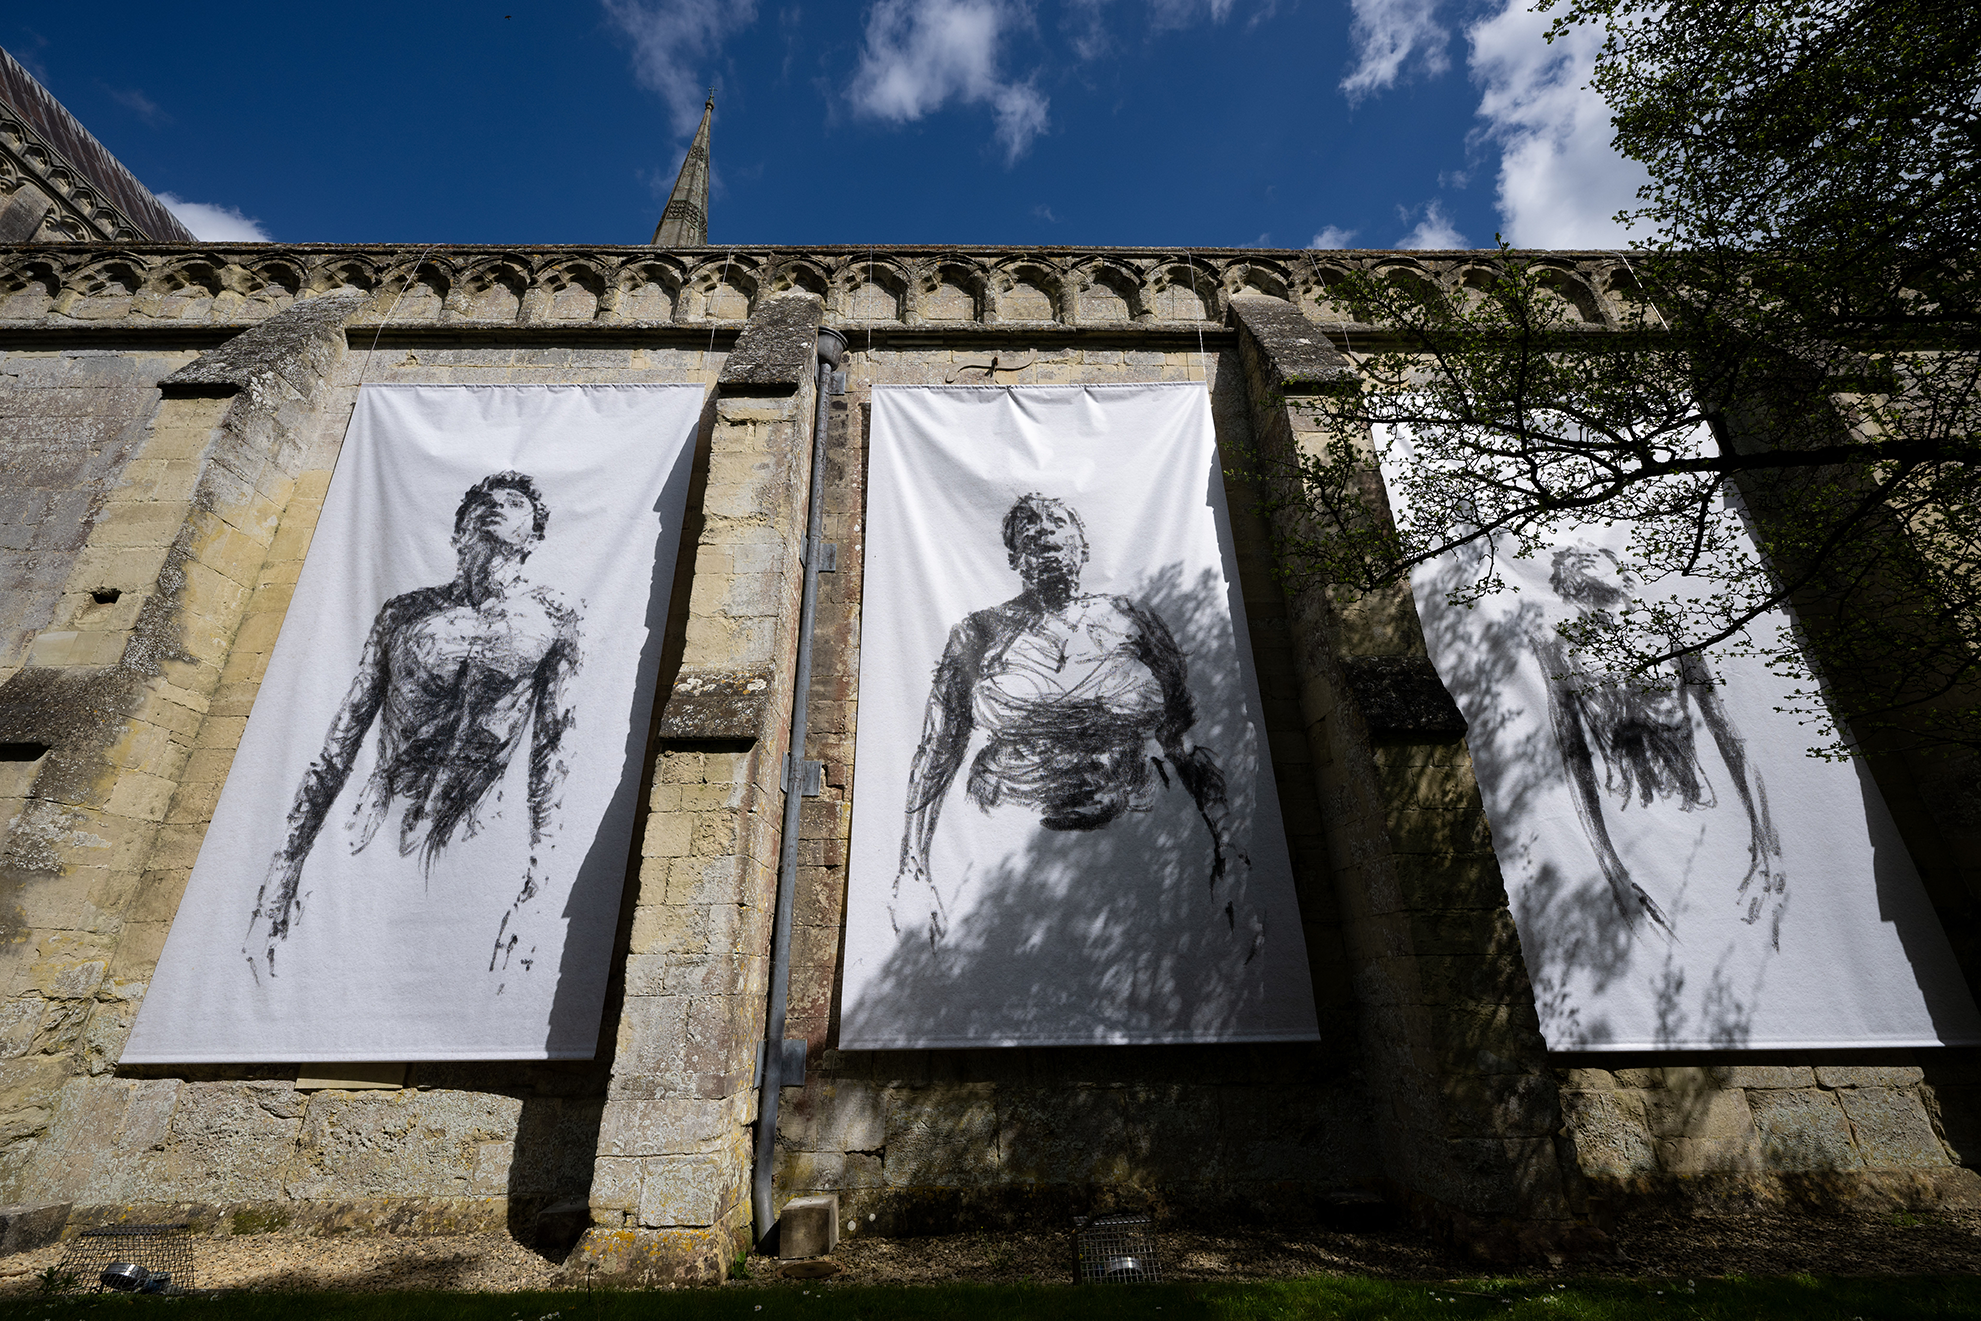 Breathe by Dryden Goodwin, three banners hanging on the walls on Salisbury Cathedral depicting people breathing